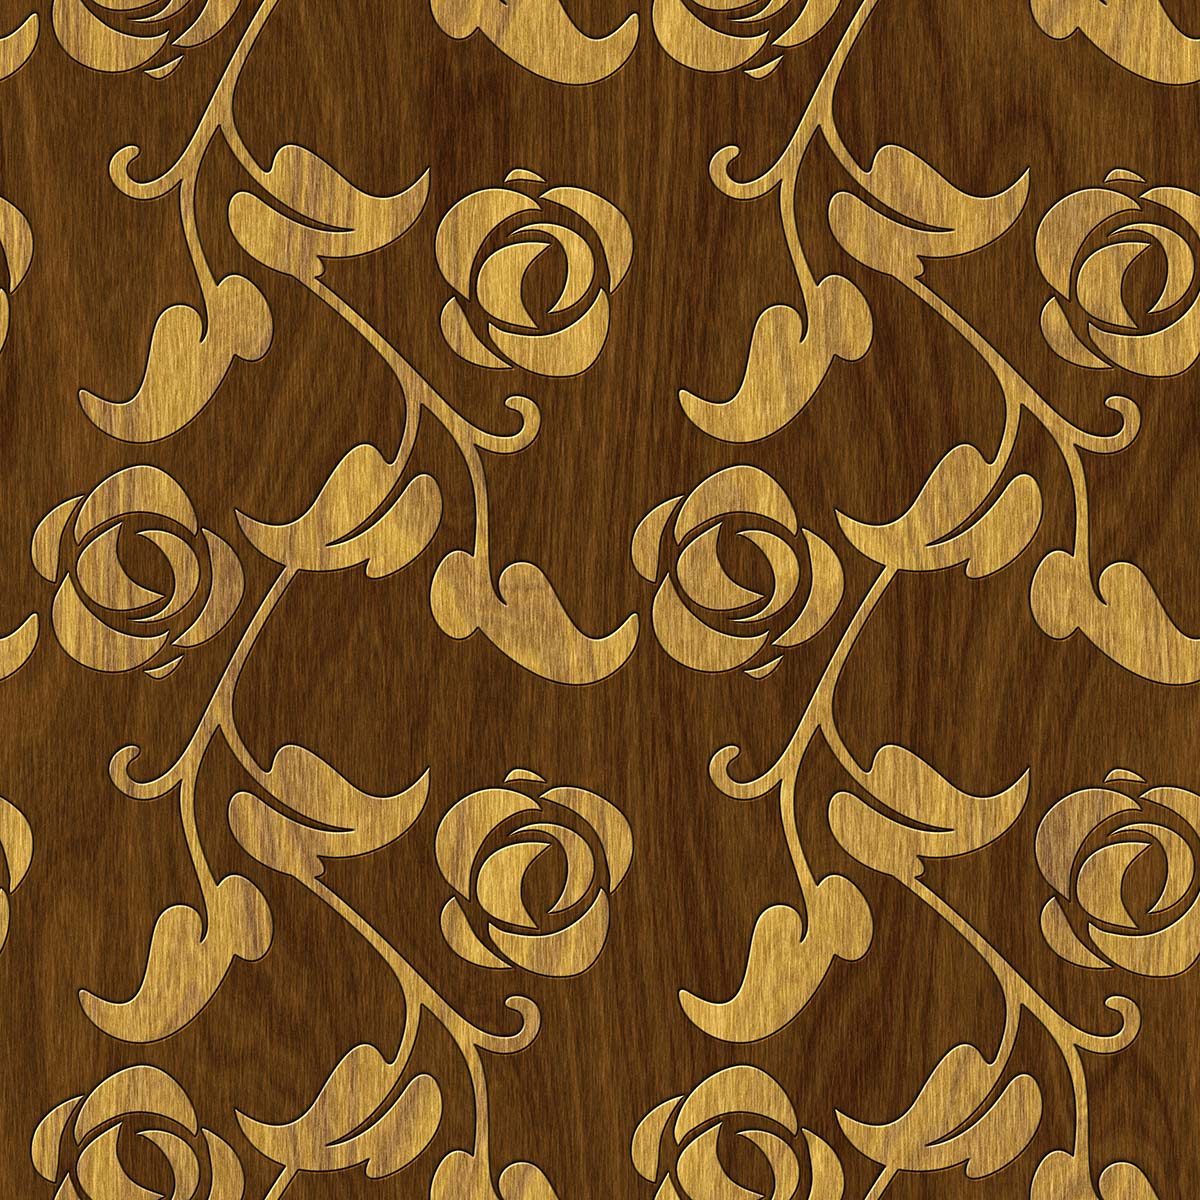 A wood surface with floral designs